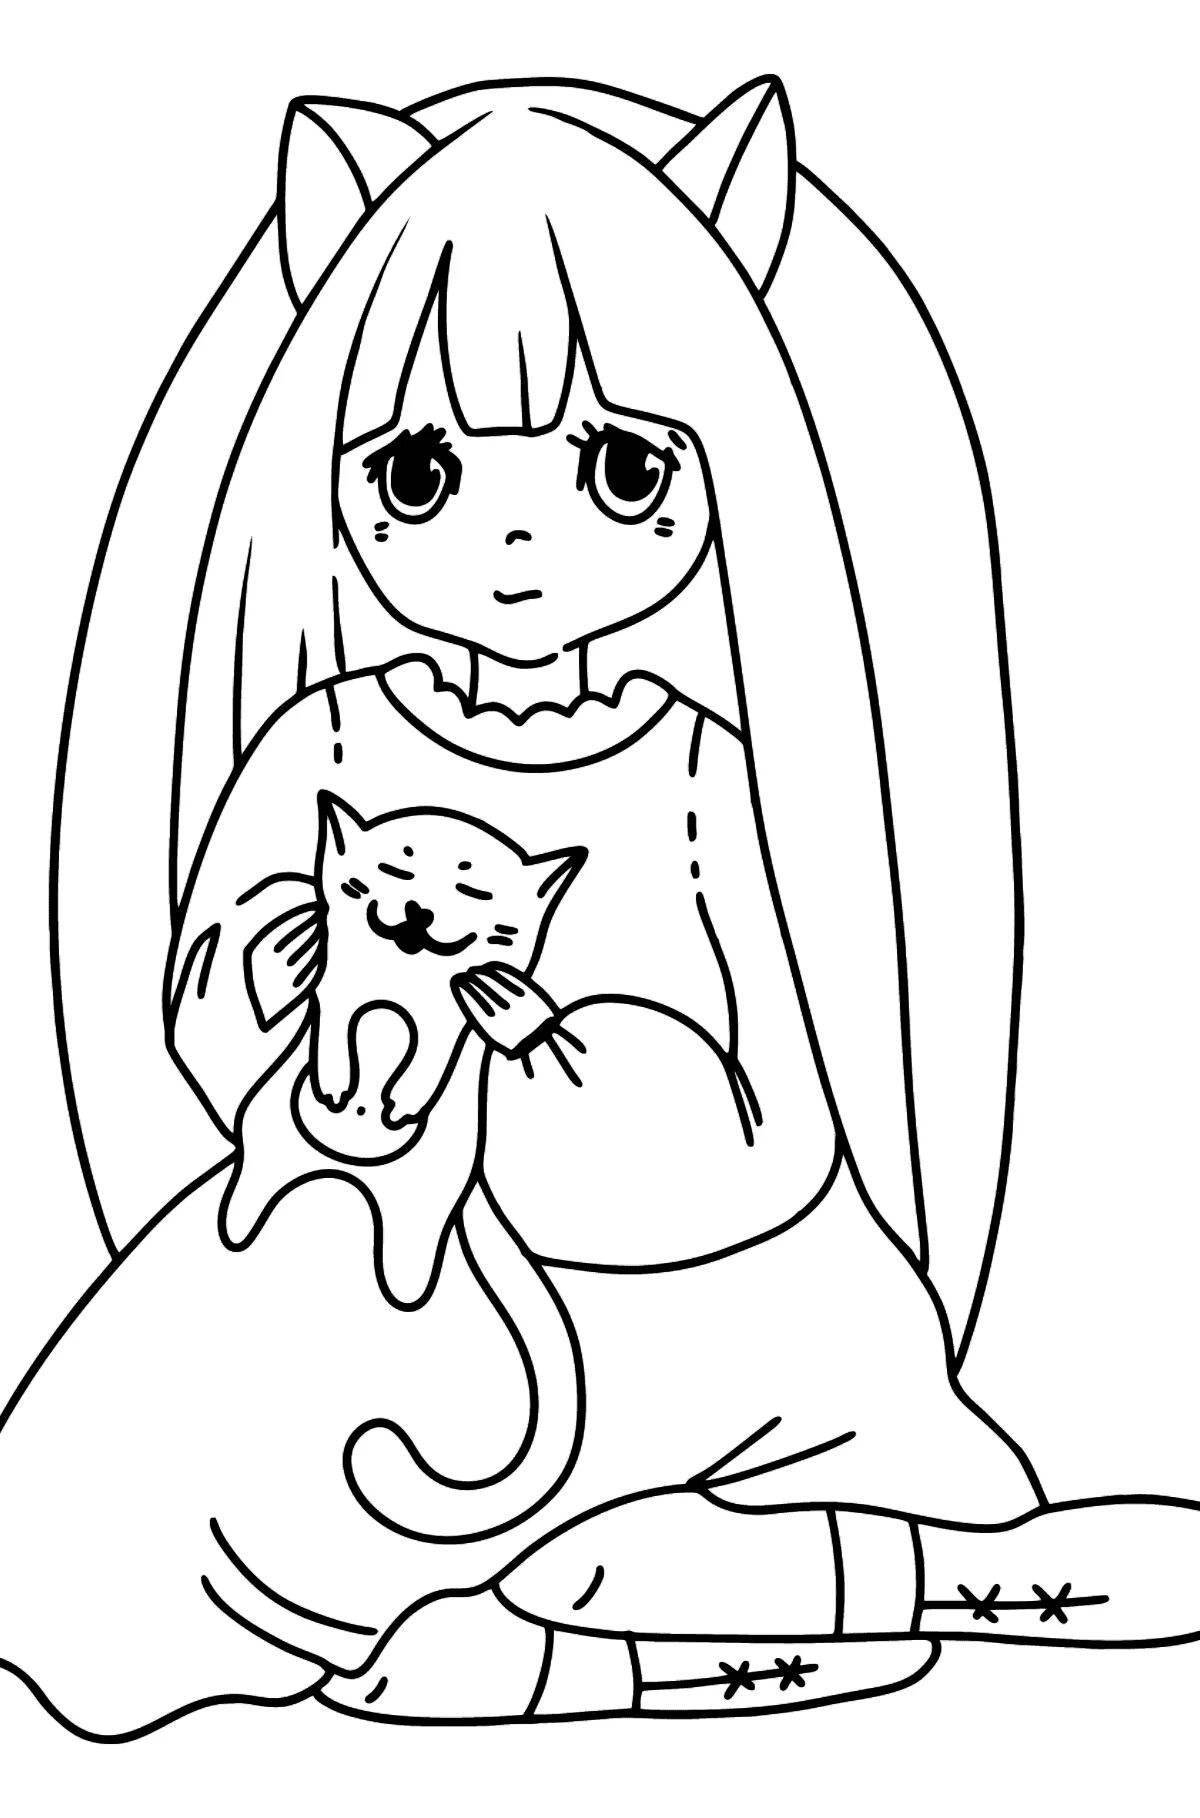 Bewitching anime girl coloring book